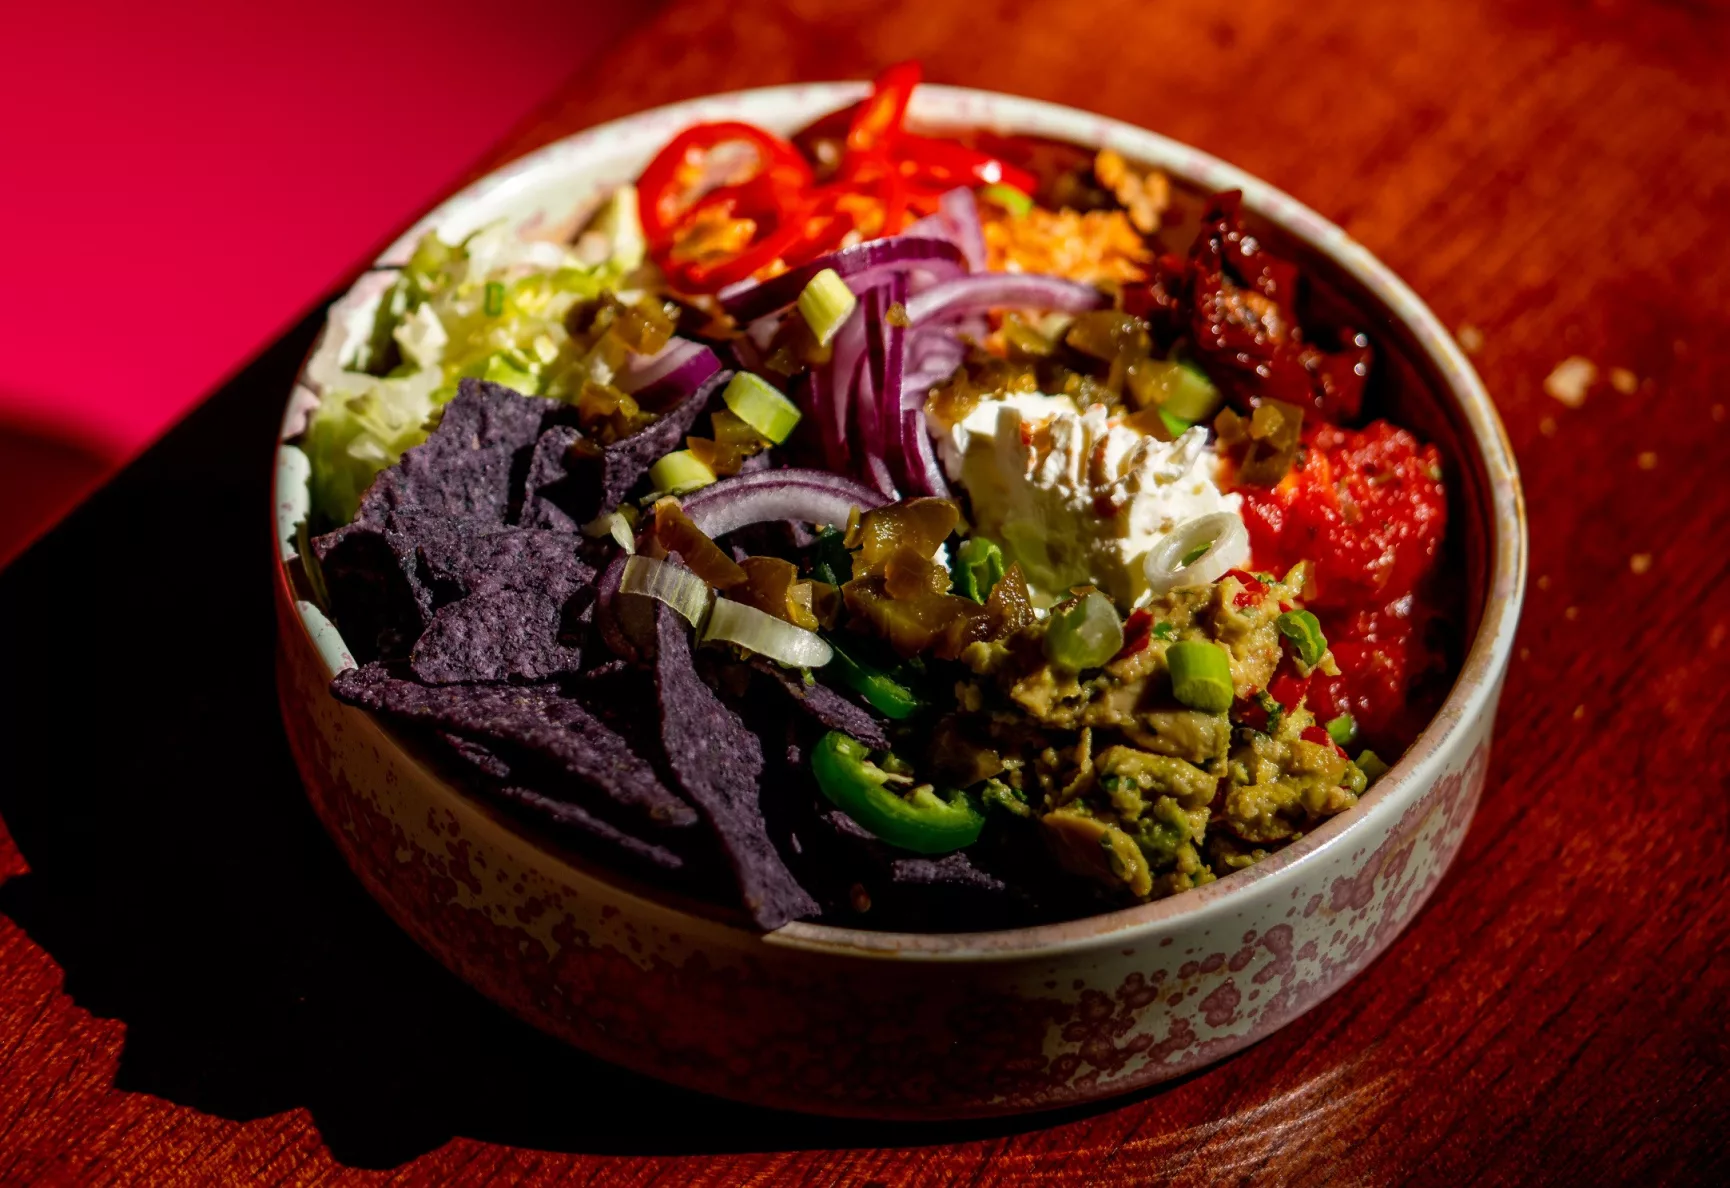 A vibrant nacho bowl with purple tortilla chips and loads of gorgeous sides